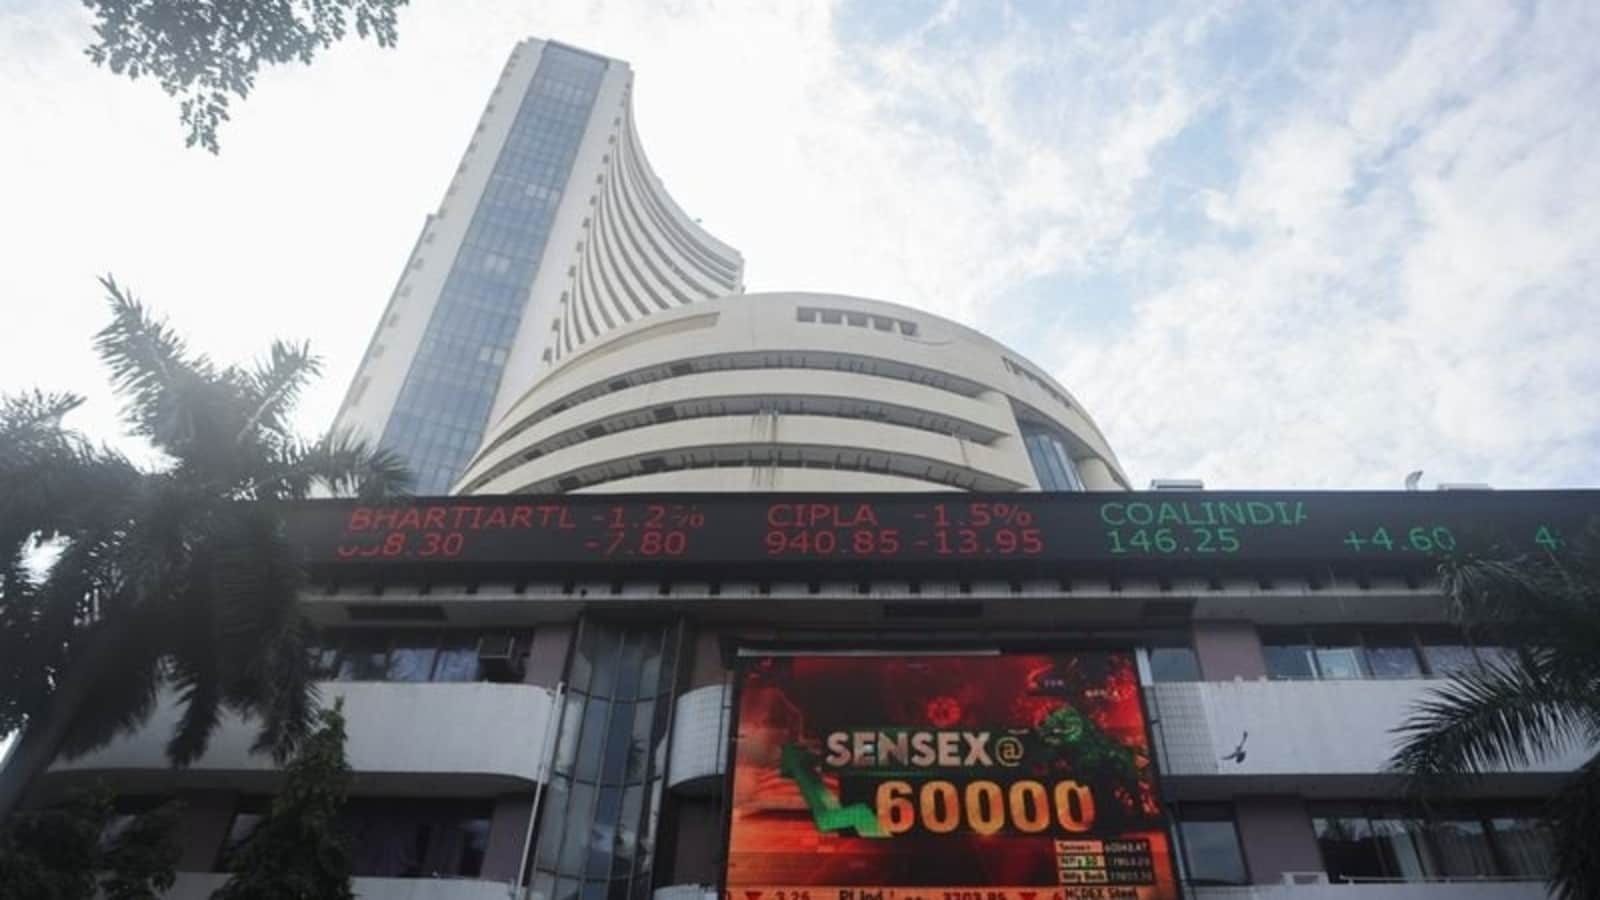 Sensex down by 709 points to close at 55,776, Nifty down by 208 points